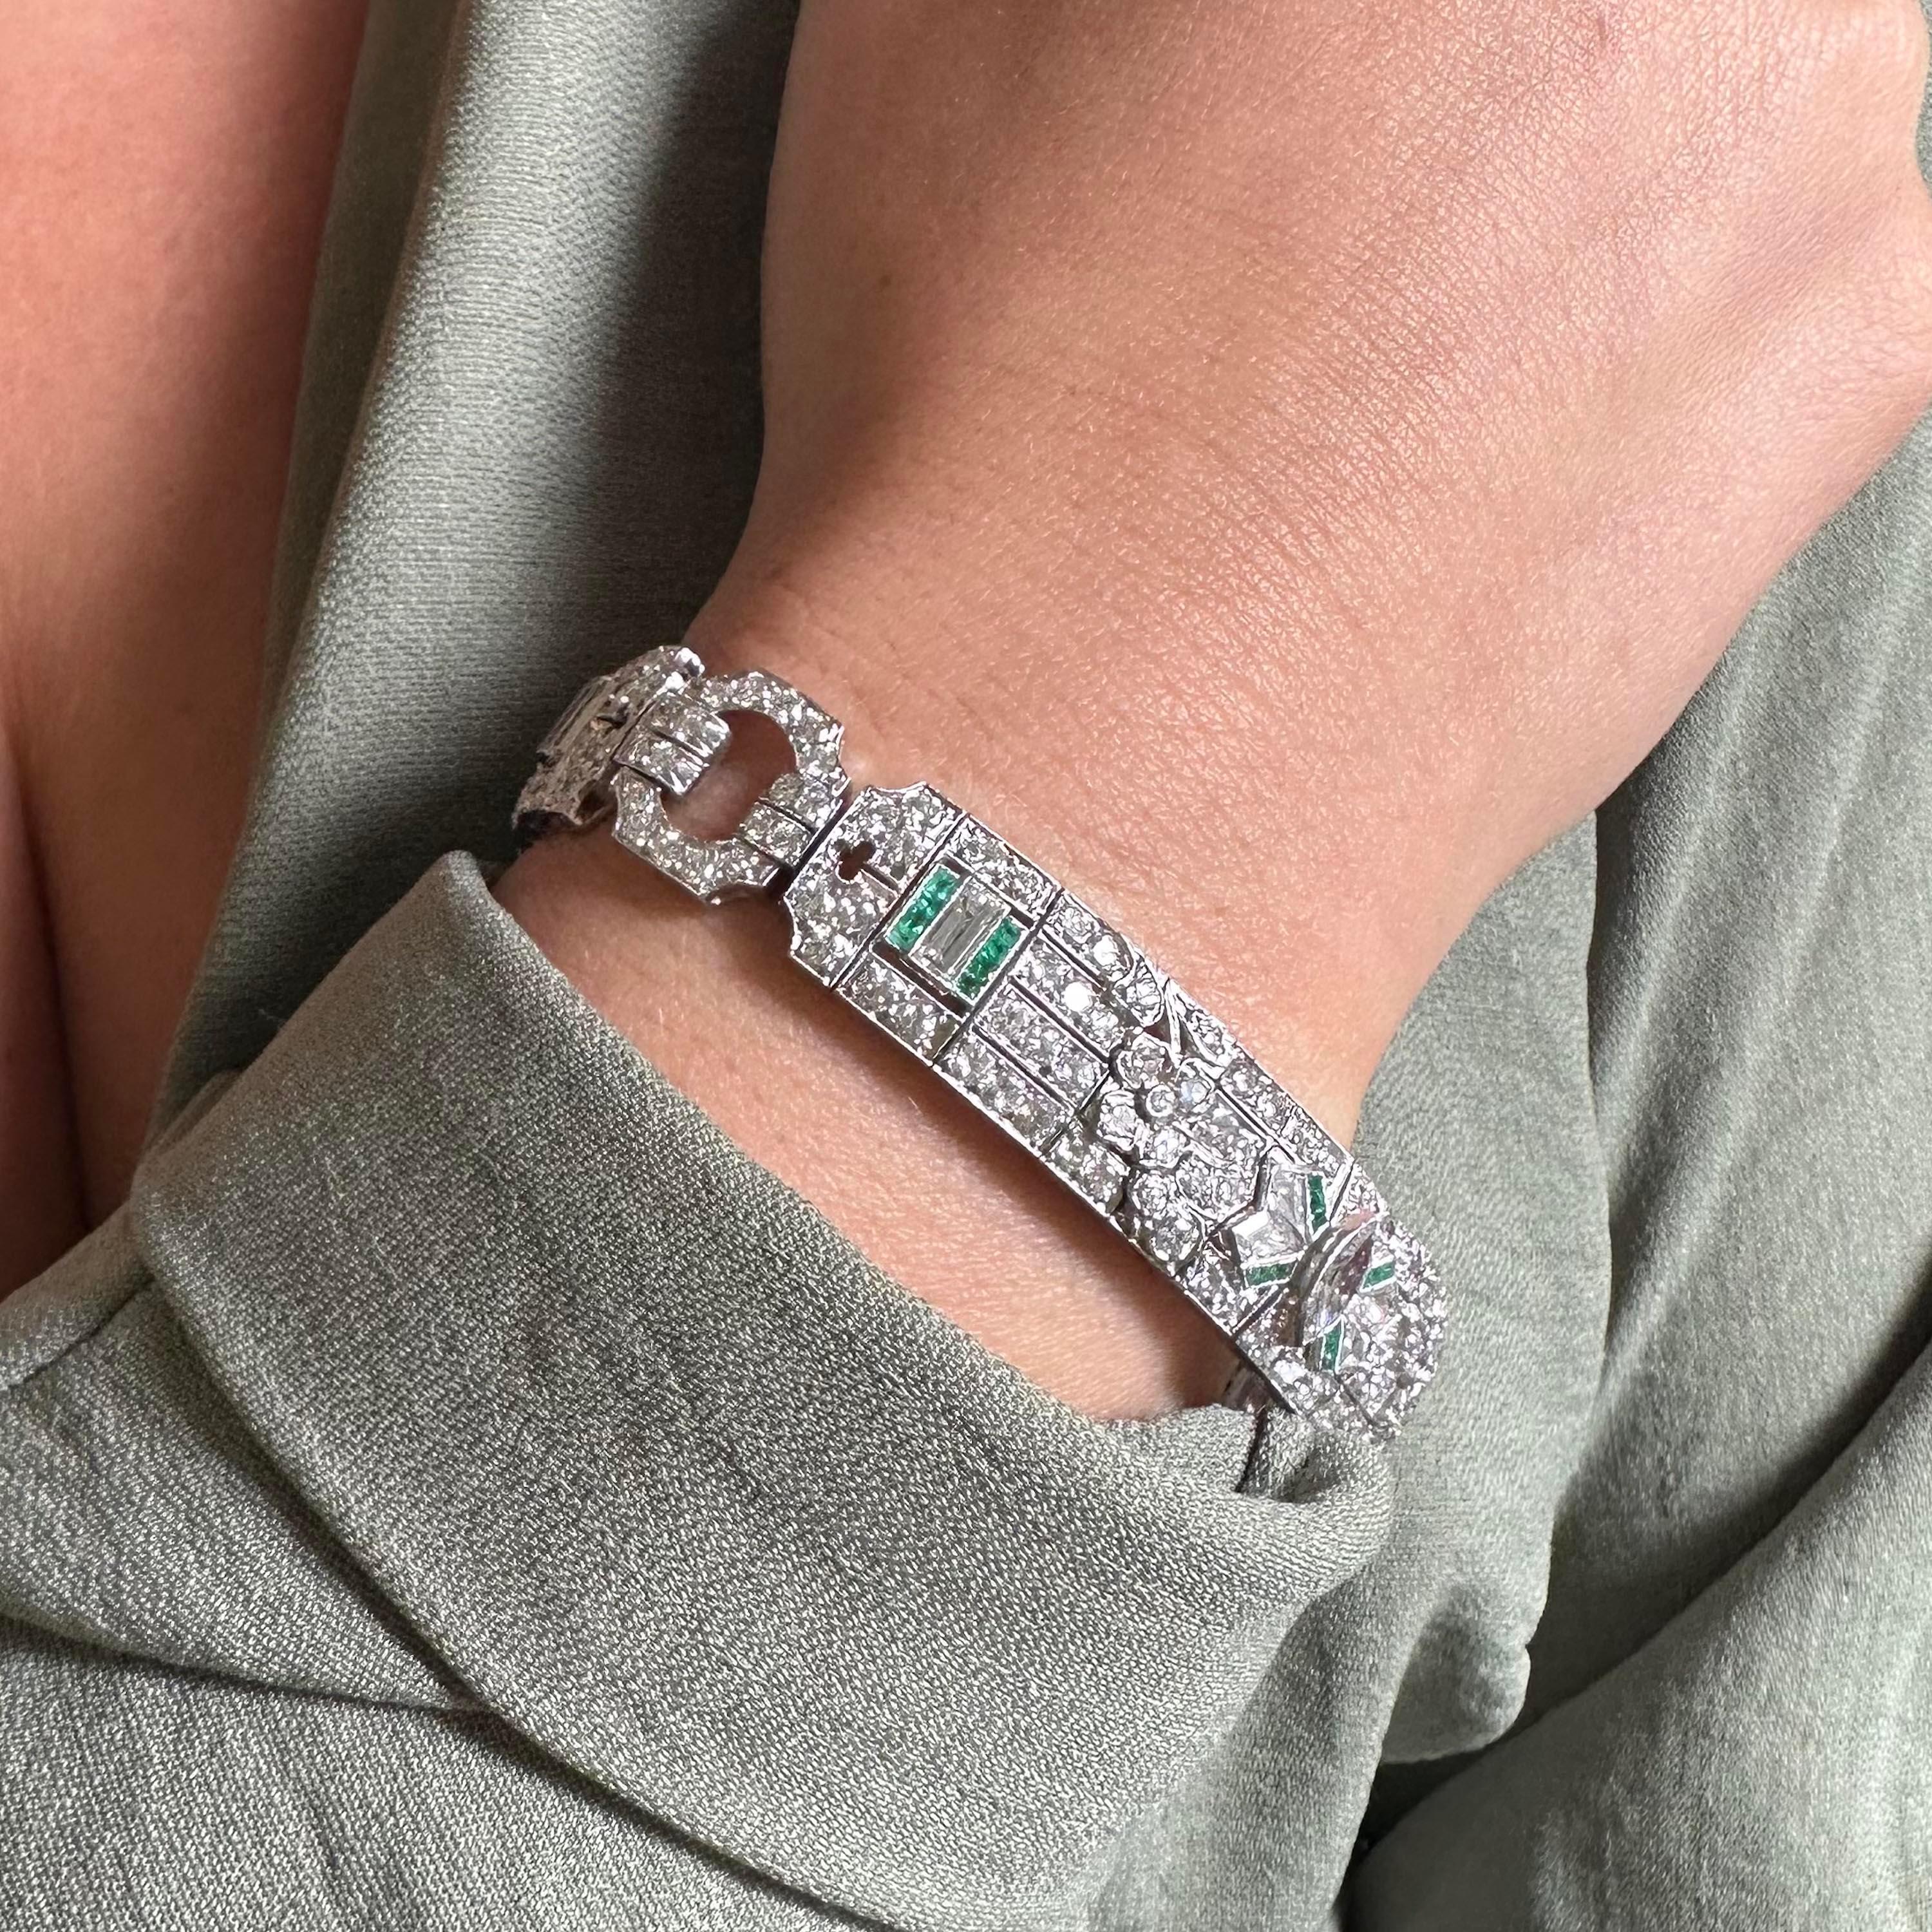 An Art Deco diamond emerald and platinum bracelet, featuring three geometric plaques, set with marquise, baguette, kite cut and round brilliant-cut diamonds, with square step-cut emeralds, mounted in platinum, stamped 10% irid plat, numbered 27700,